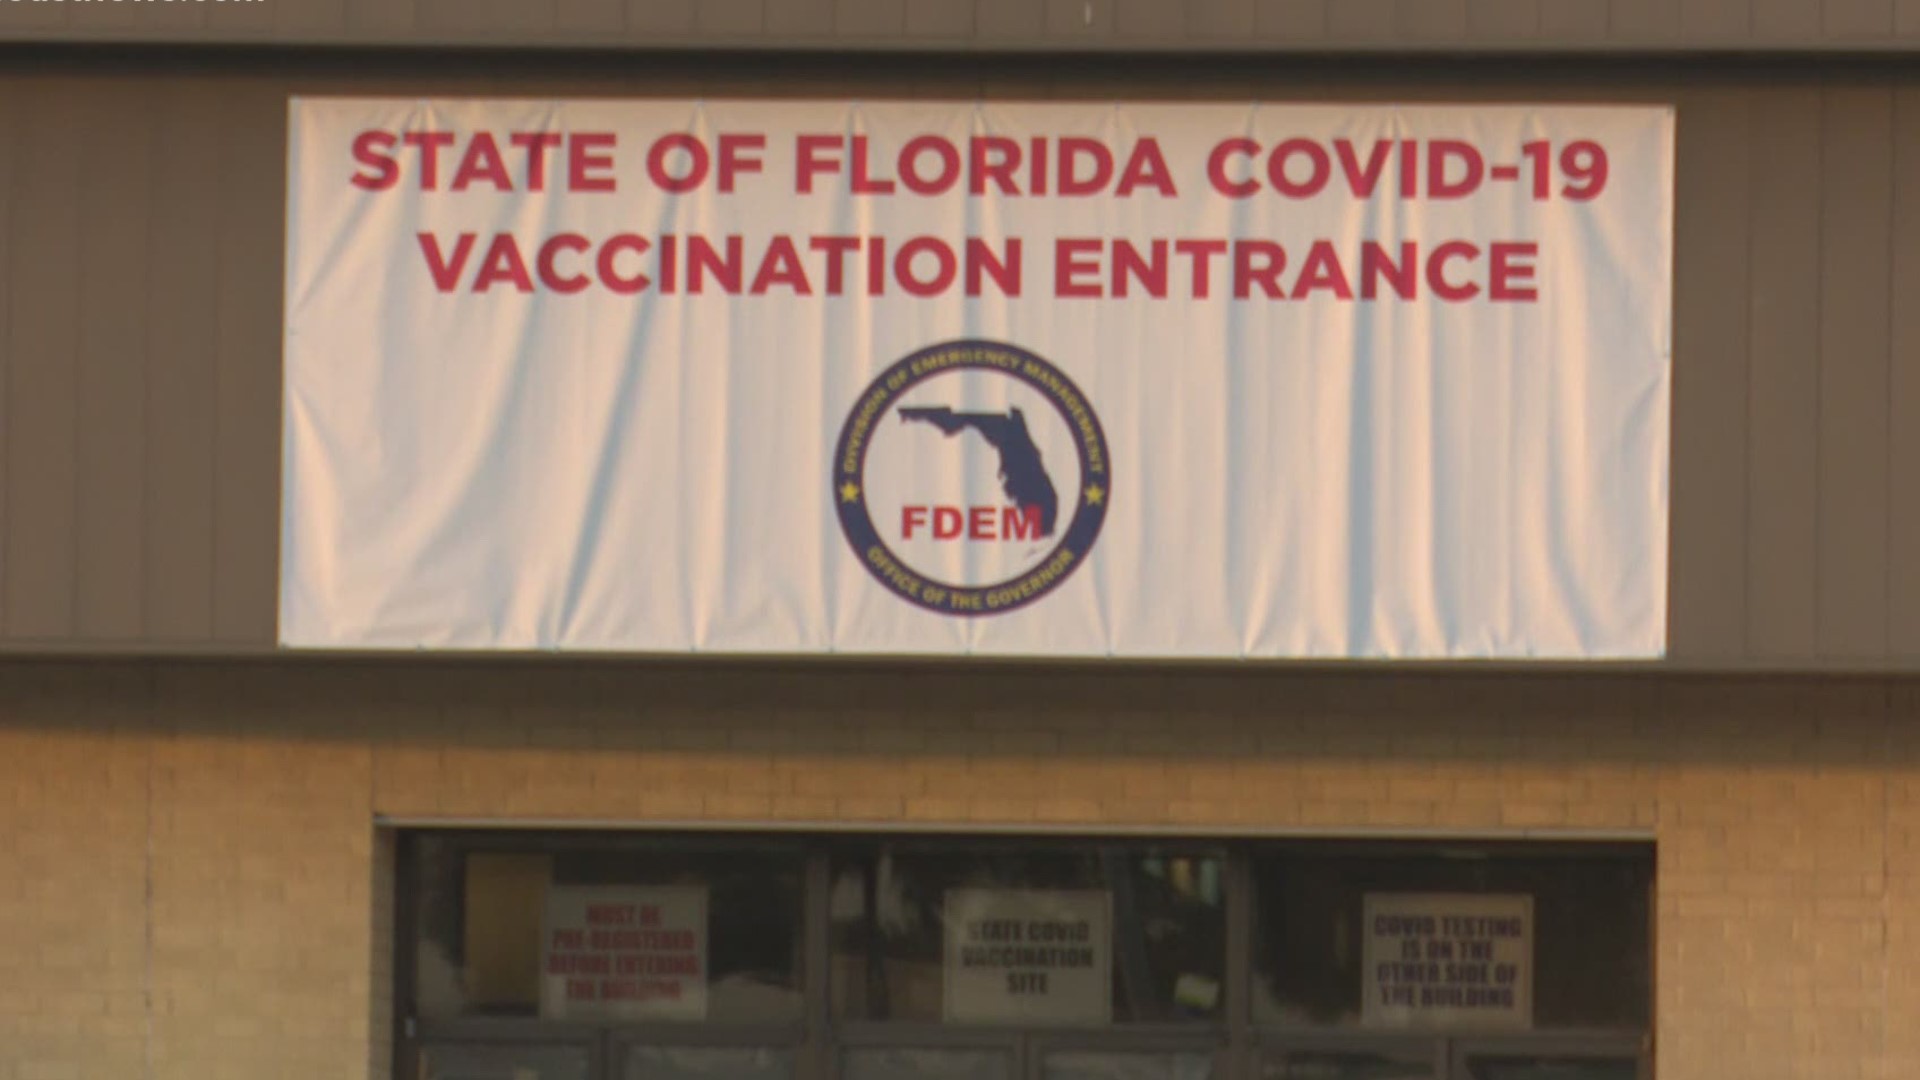 Regency Mall vaccine site not impacted by weather delays